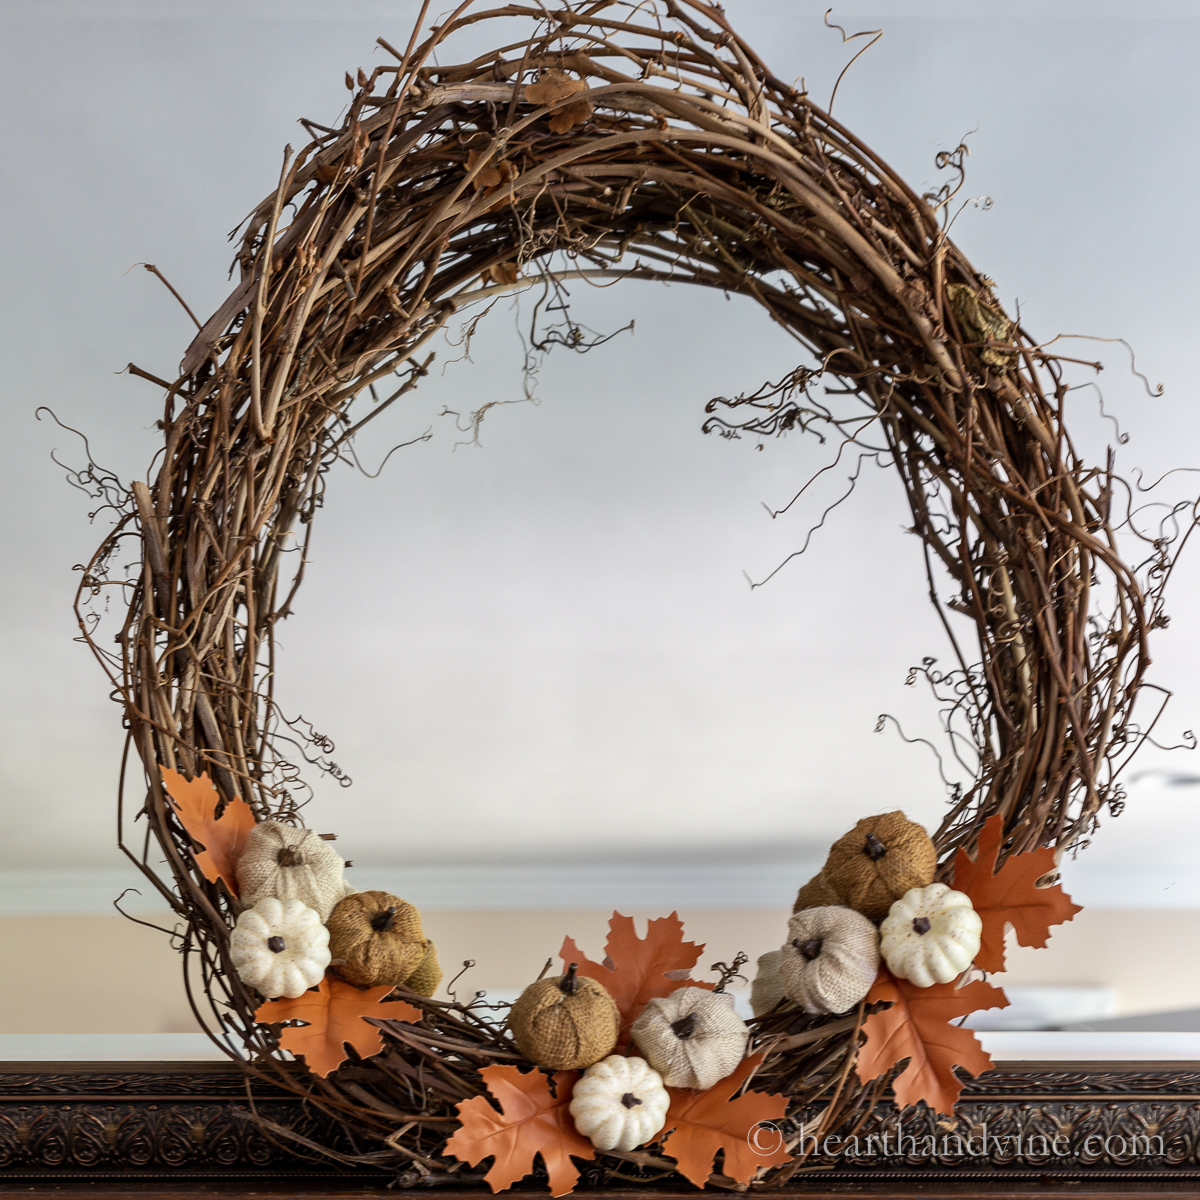 Grapevine wreath with mini pumpkins and faux leather oak leaves leaning on a mantel.